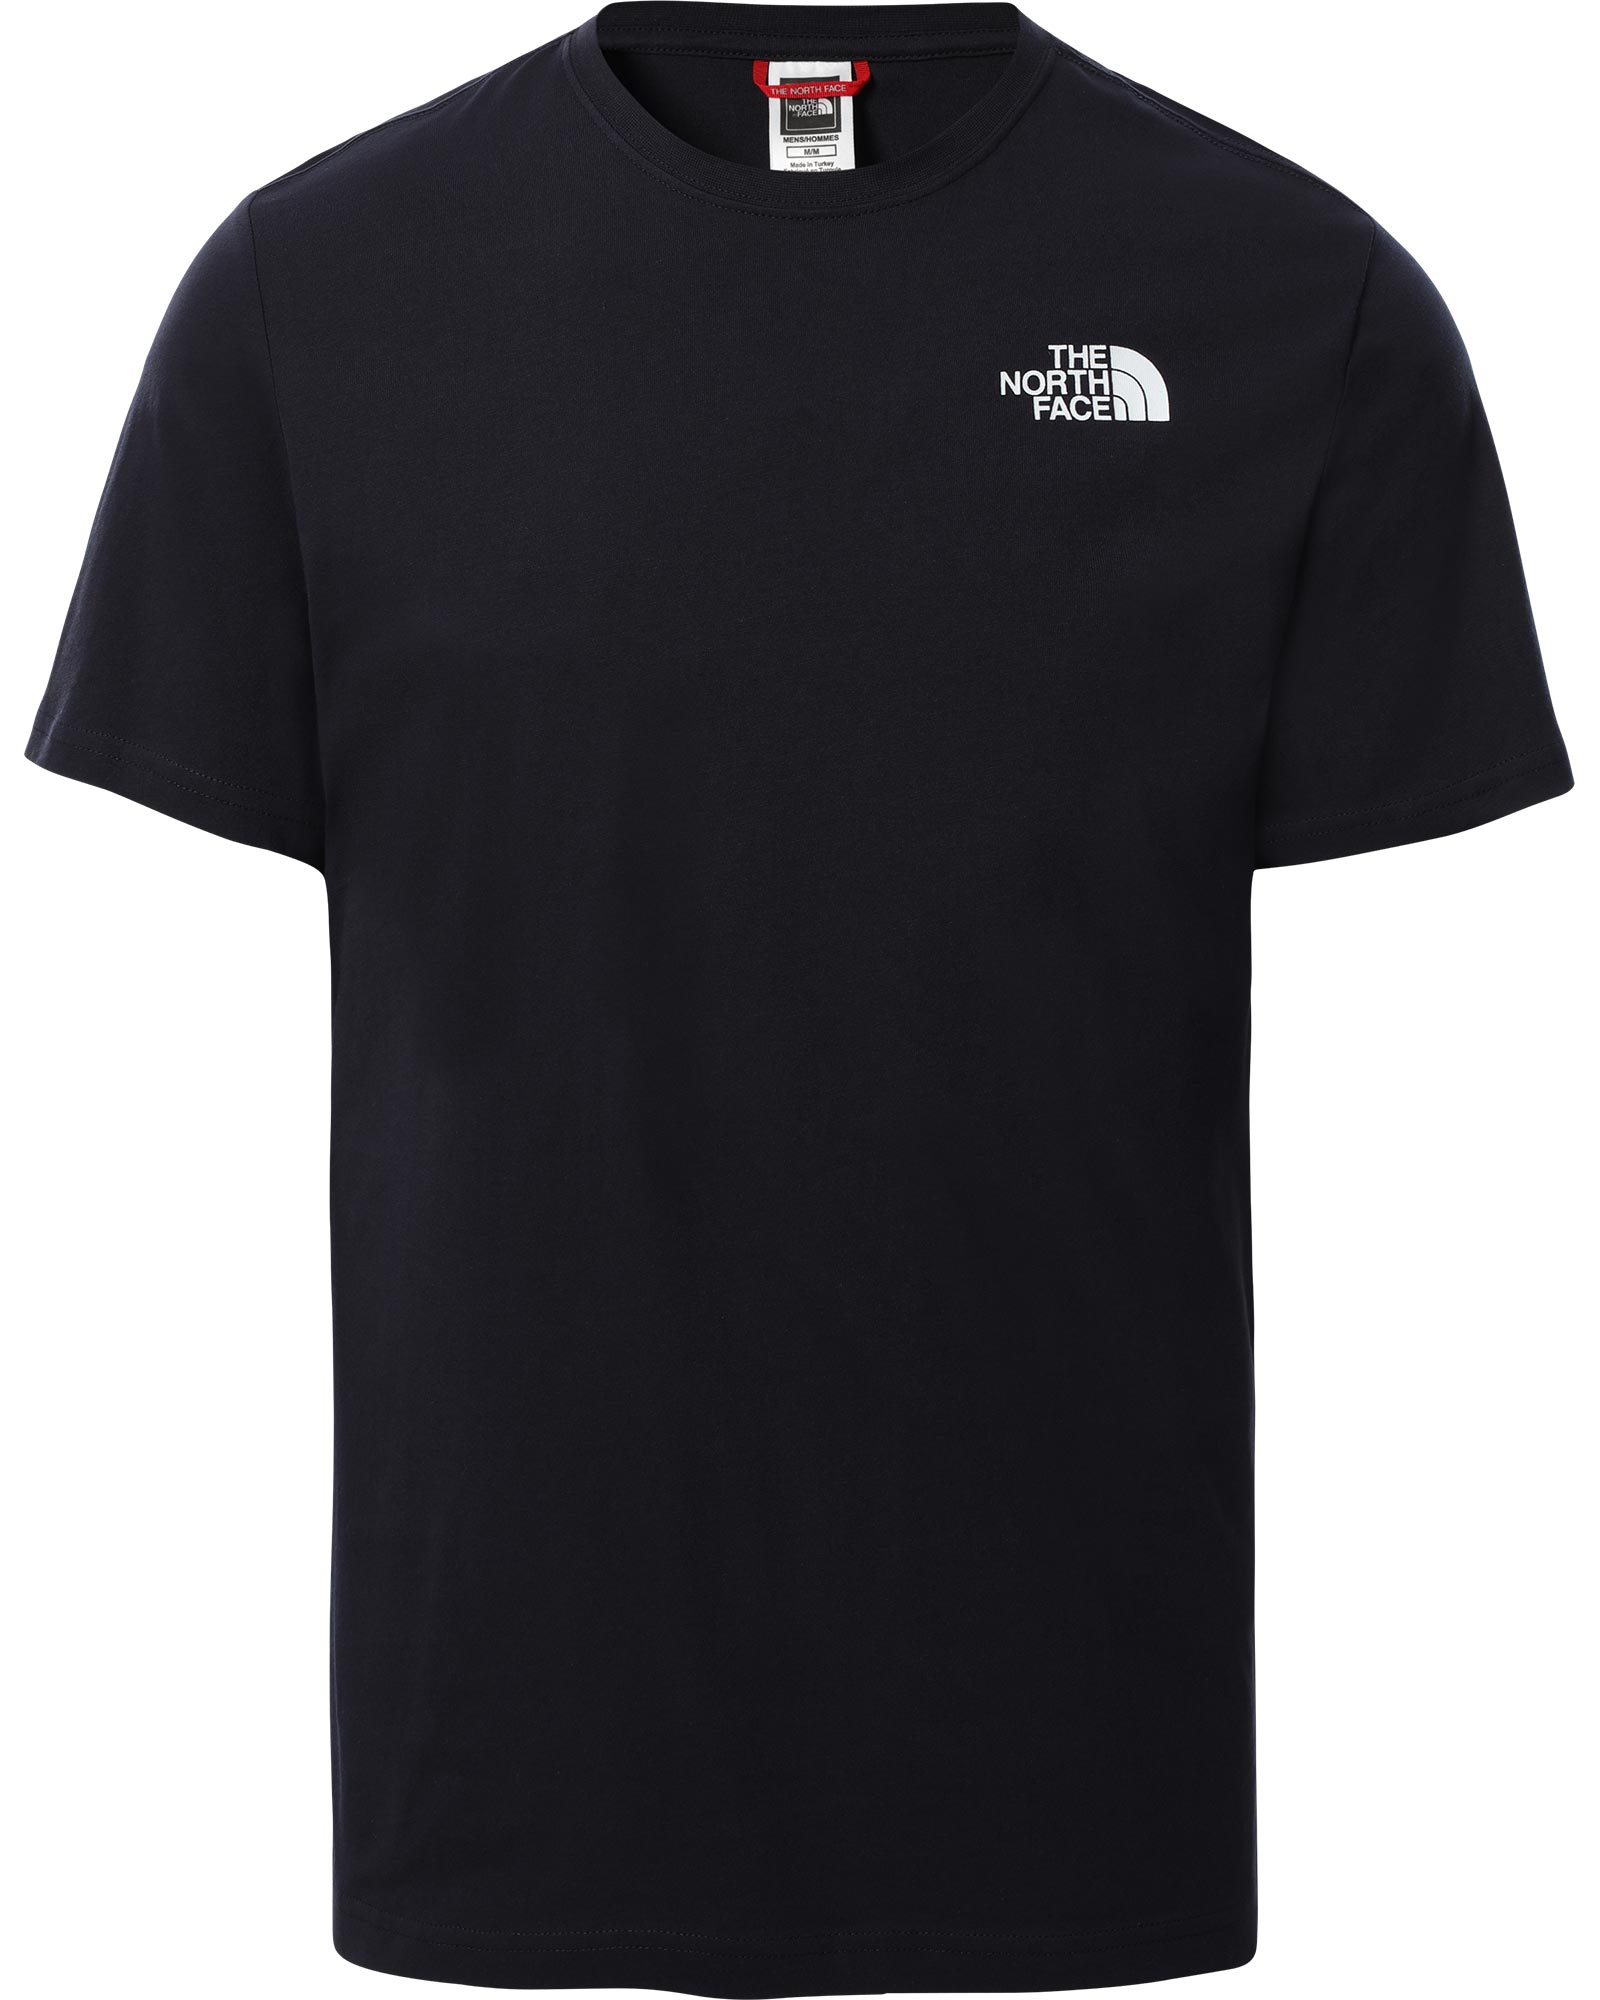 The North Face Red Box Men’s T Shirt - Aviator Navy S